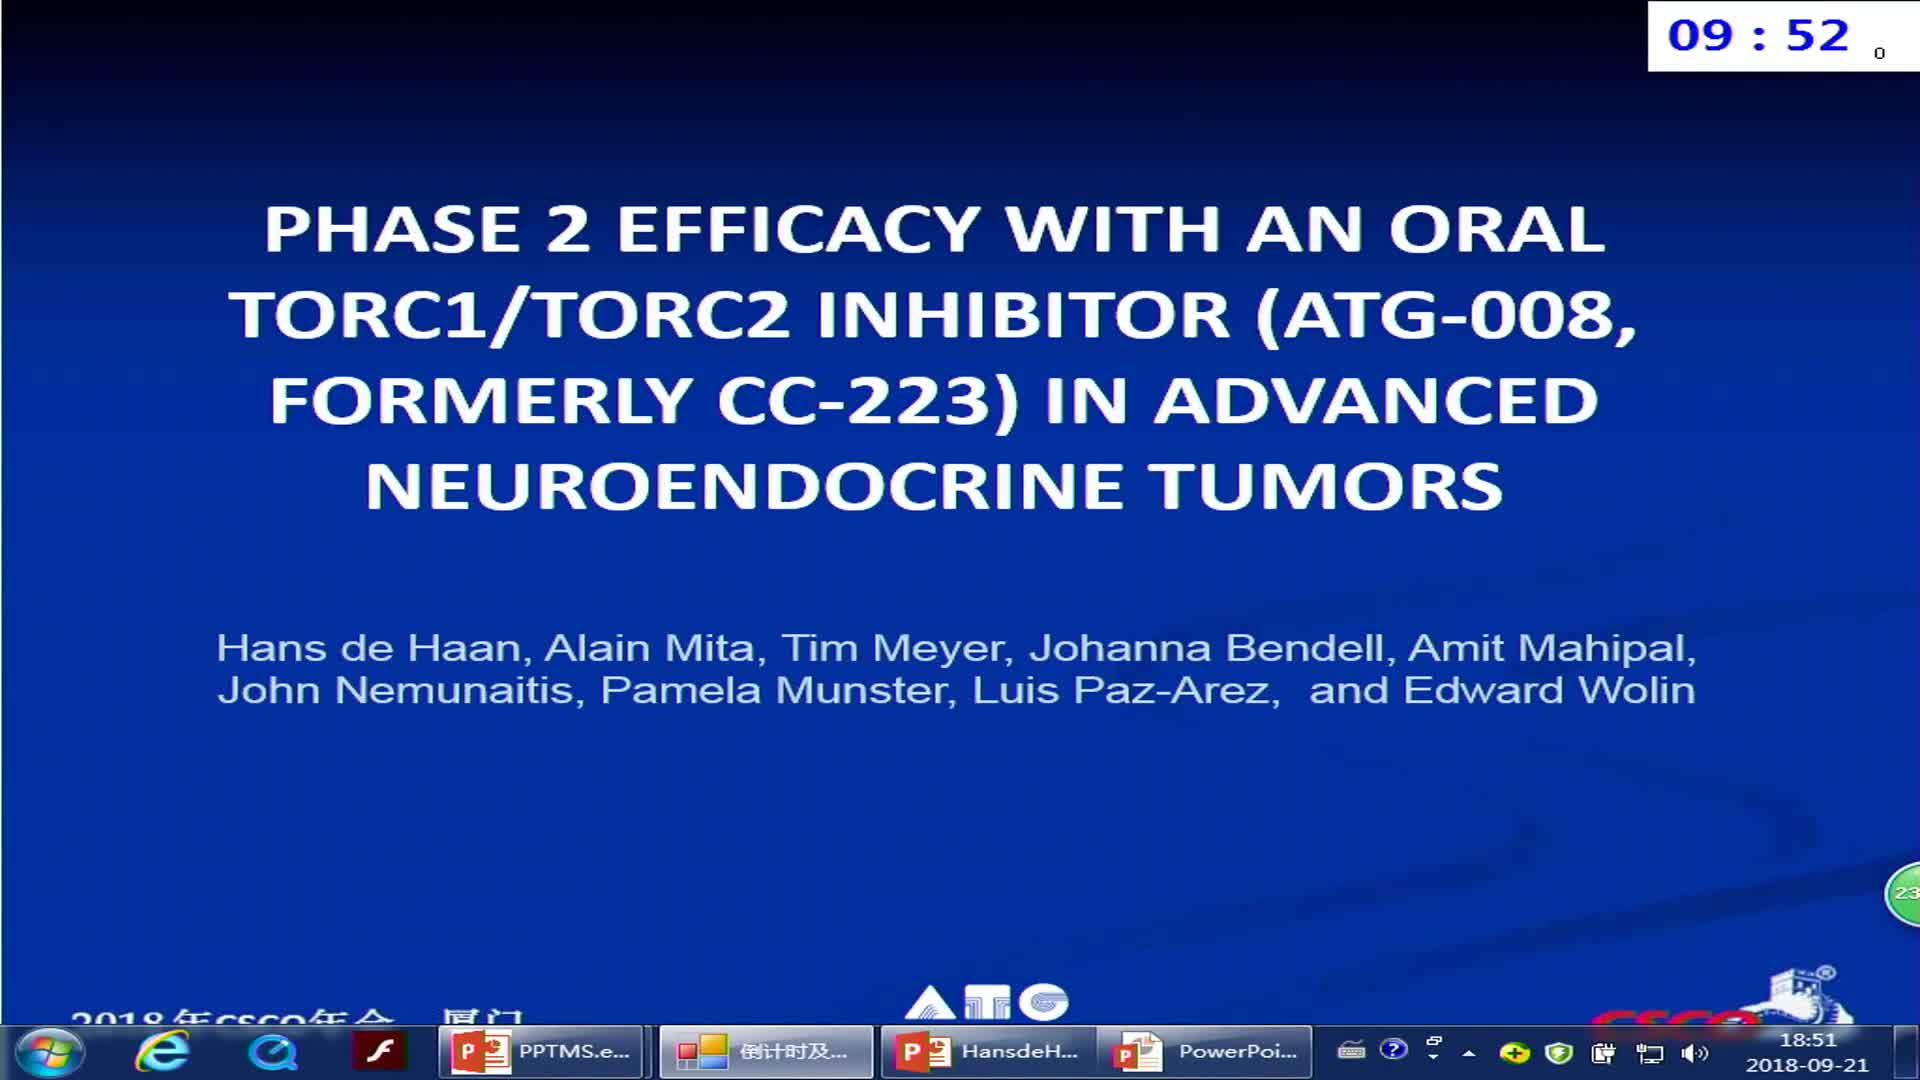 Phase 2 efficacy with an oral TORC1/TORC2 inhibitor (ATG-008, formerly CC-223) in advanced neuroendocrine tumors (NET)